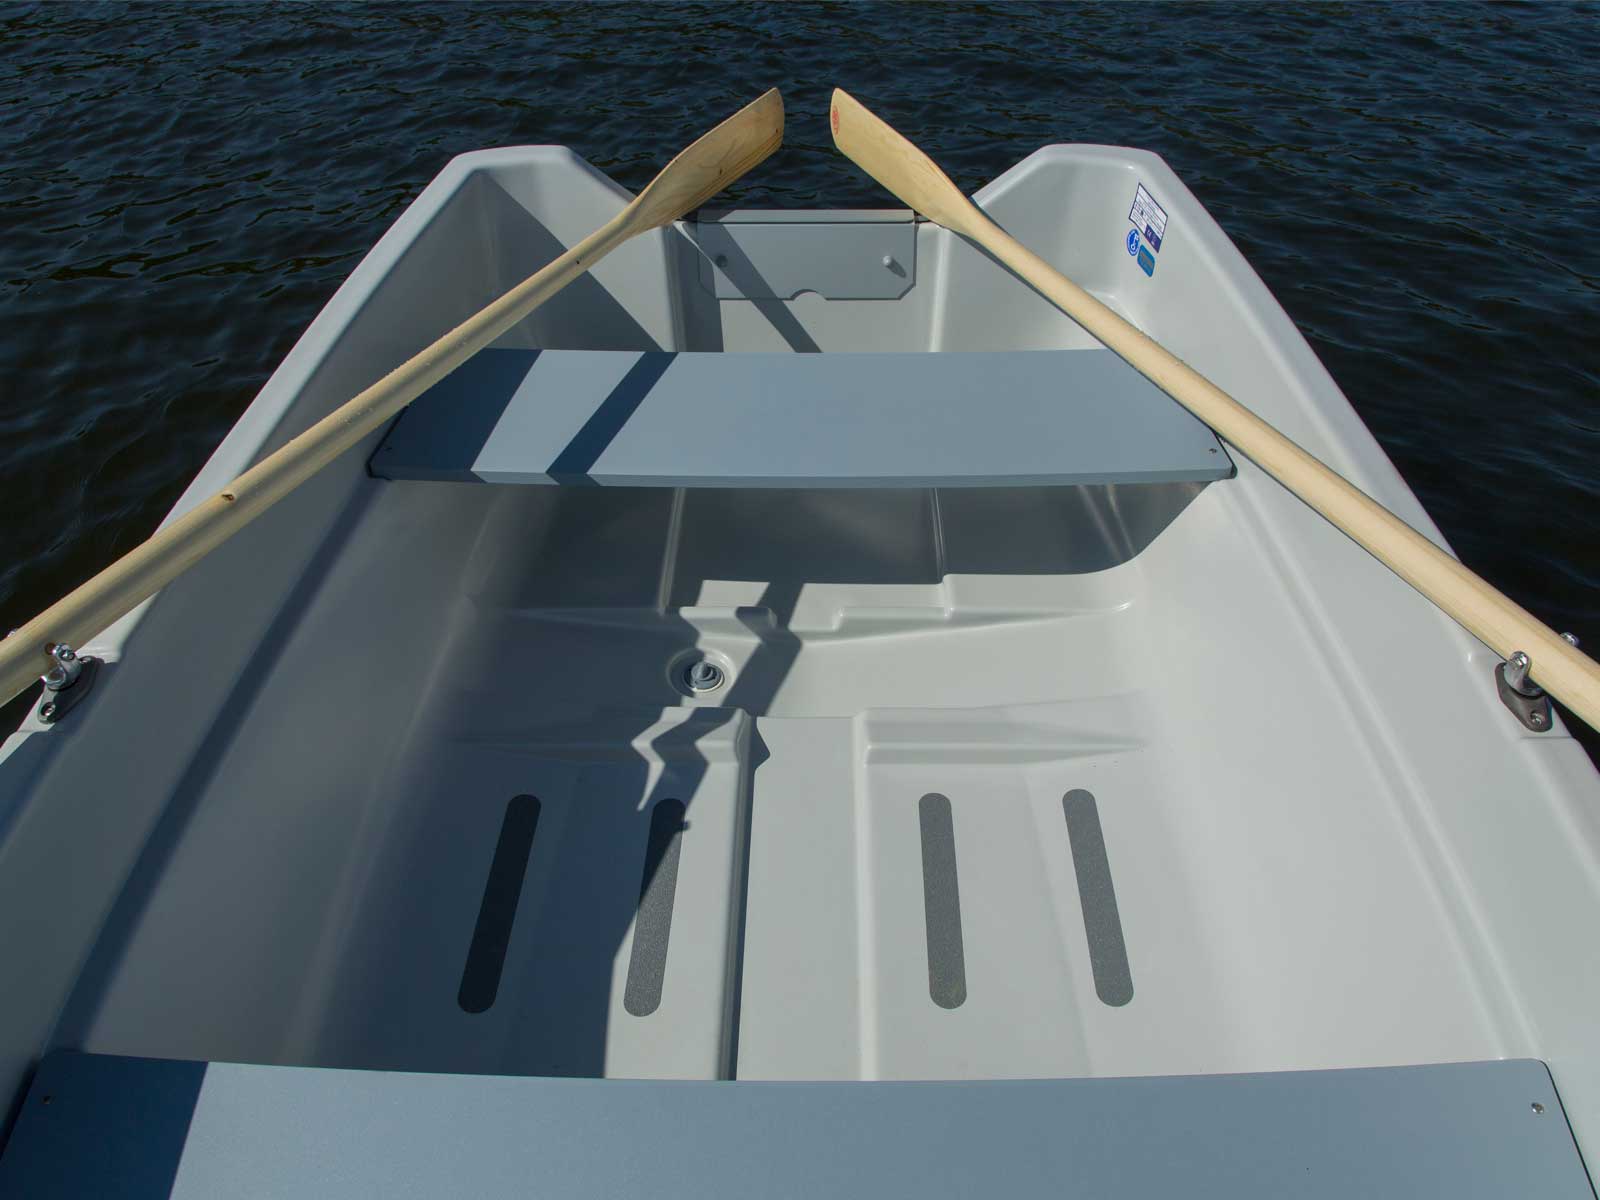 Terhi 310 Sunny | Boat Solutions, Utting am Ammersee